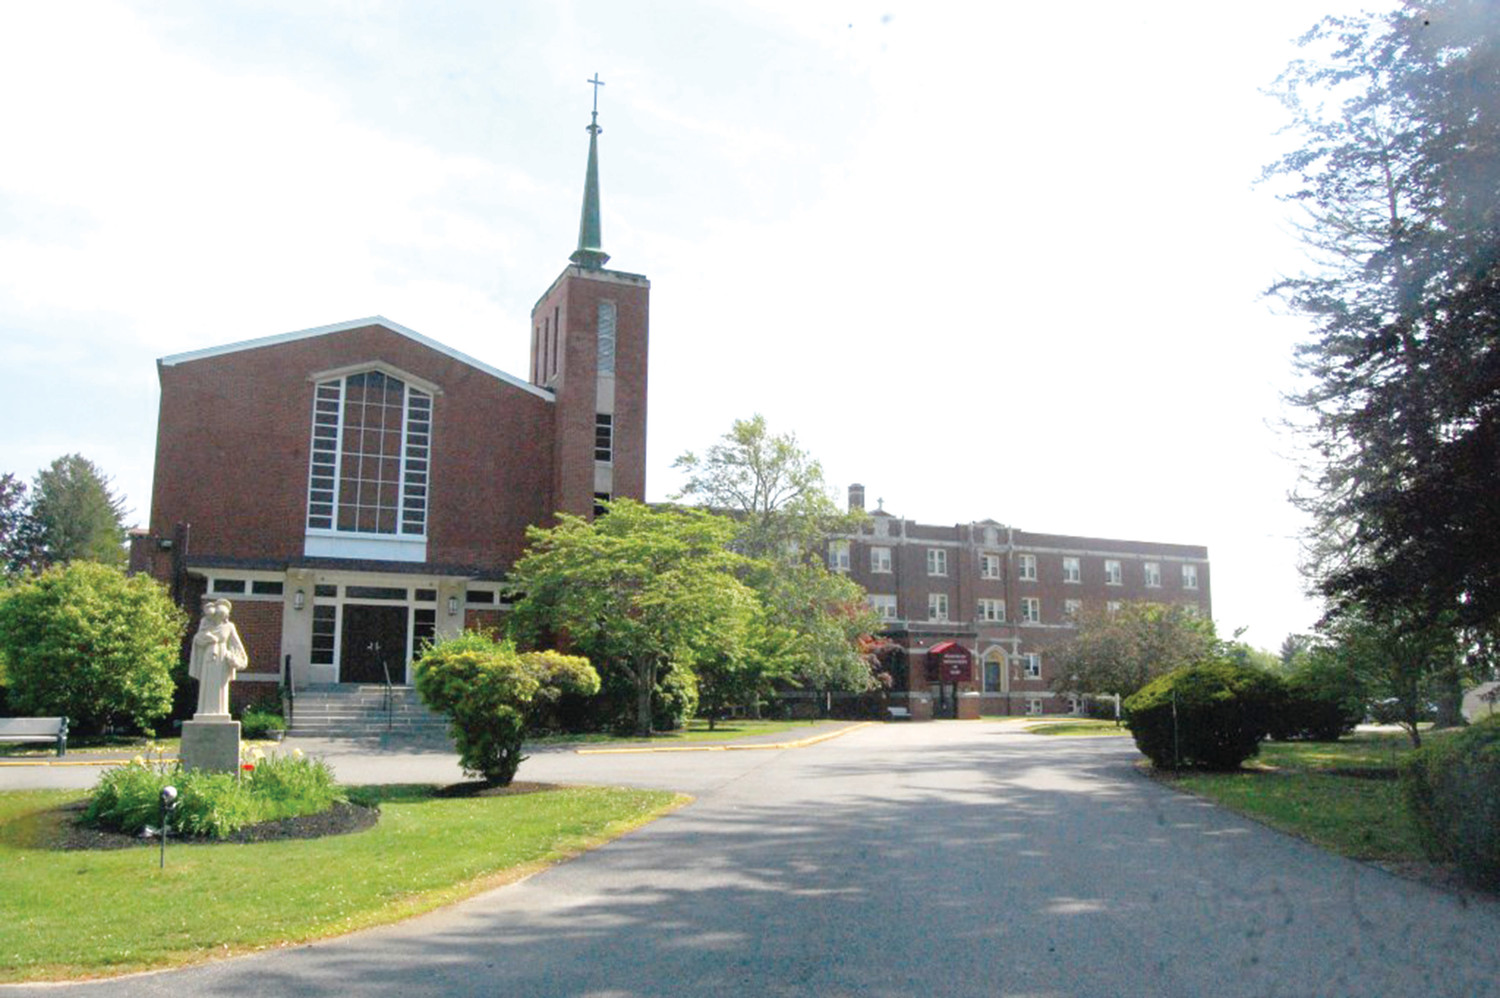 The Franciscan Missionaries of Mary reside and operate Fruit Hill Adult Day Services from their campus in North Providence.